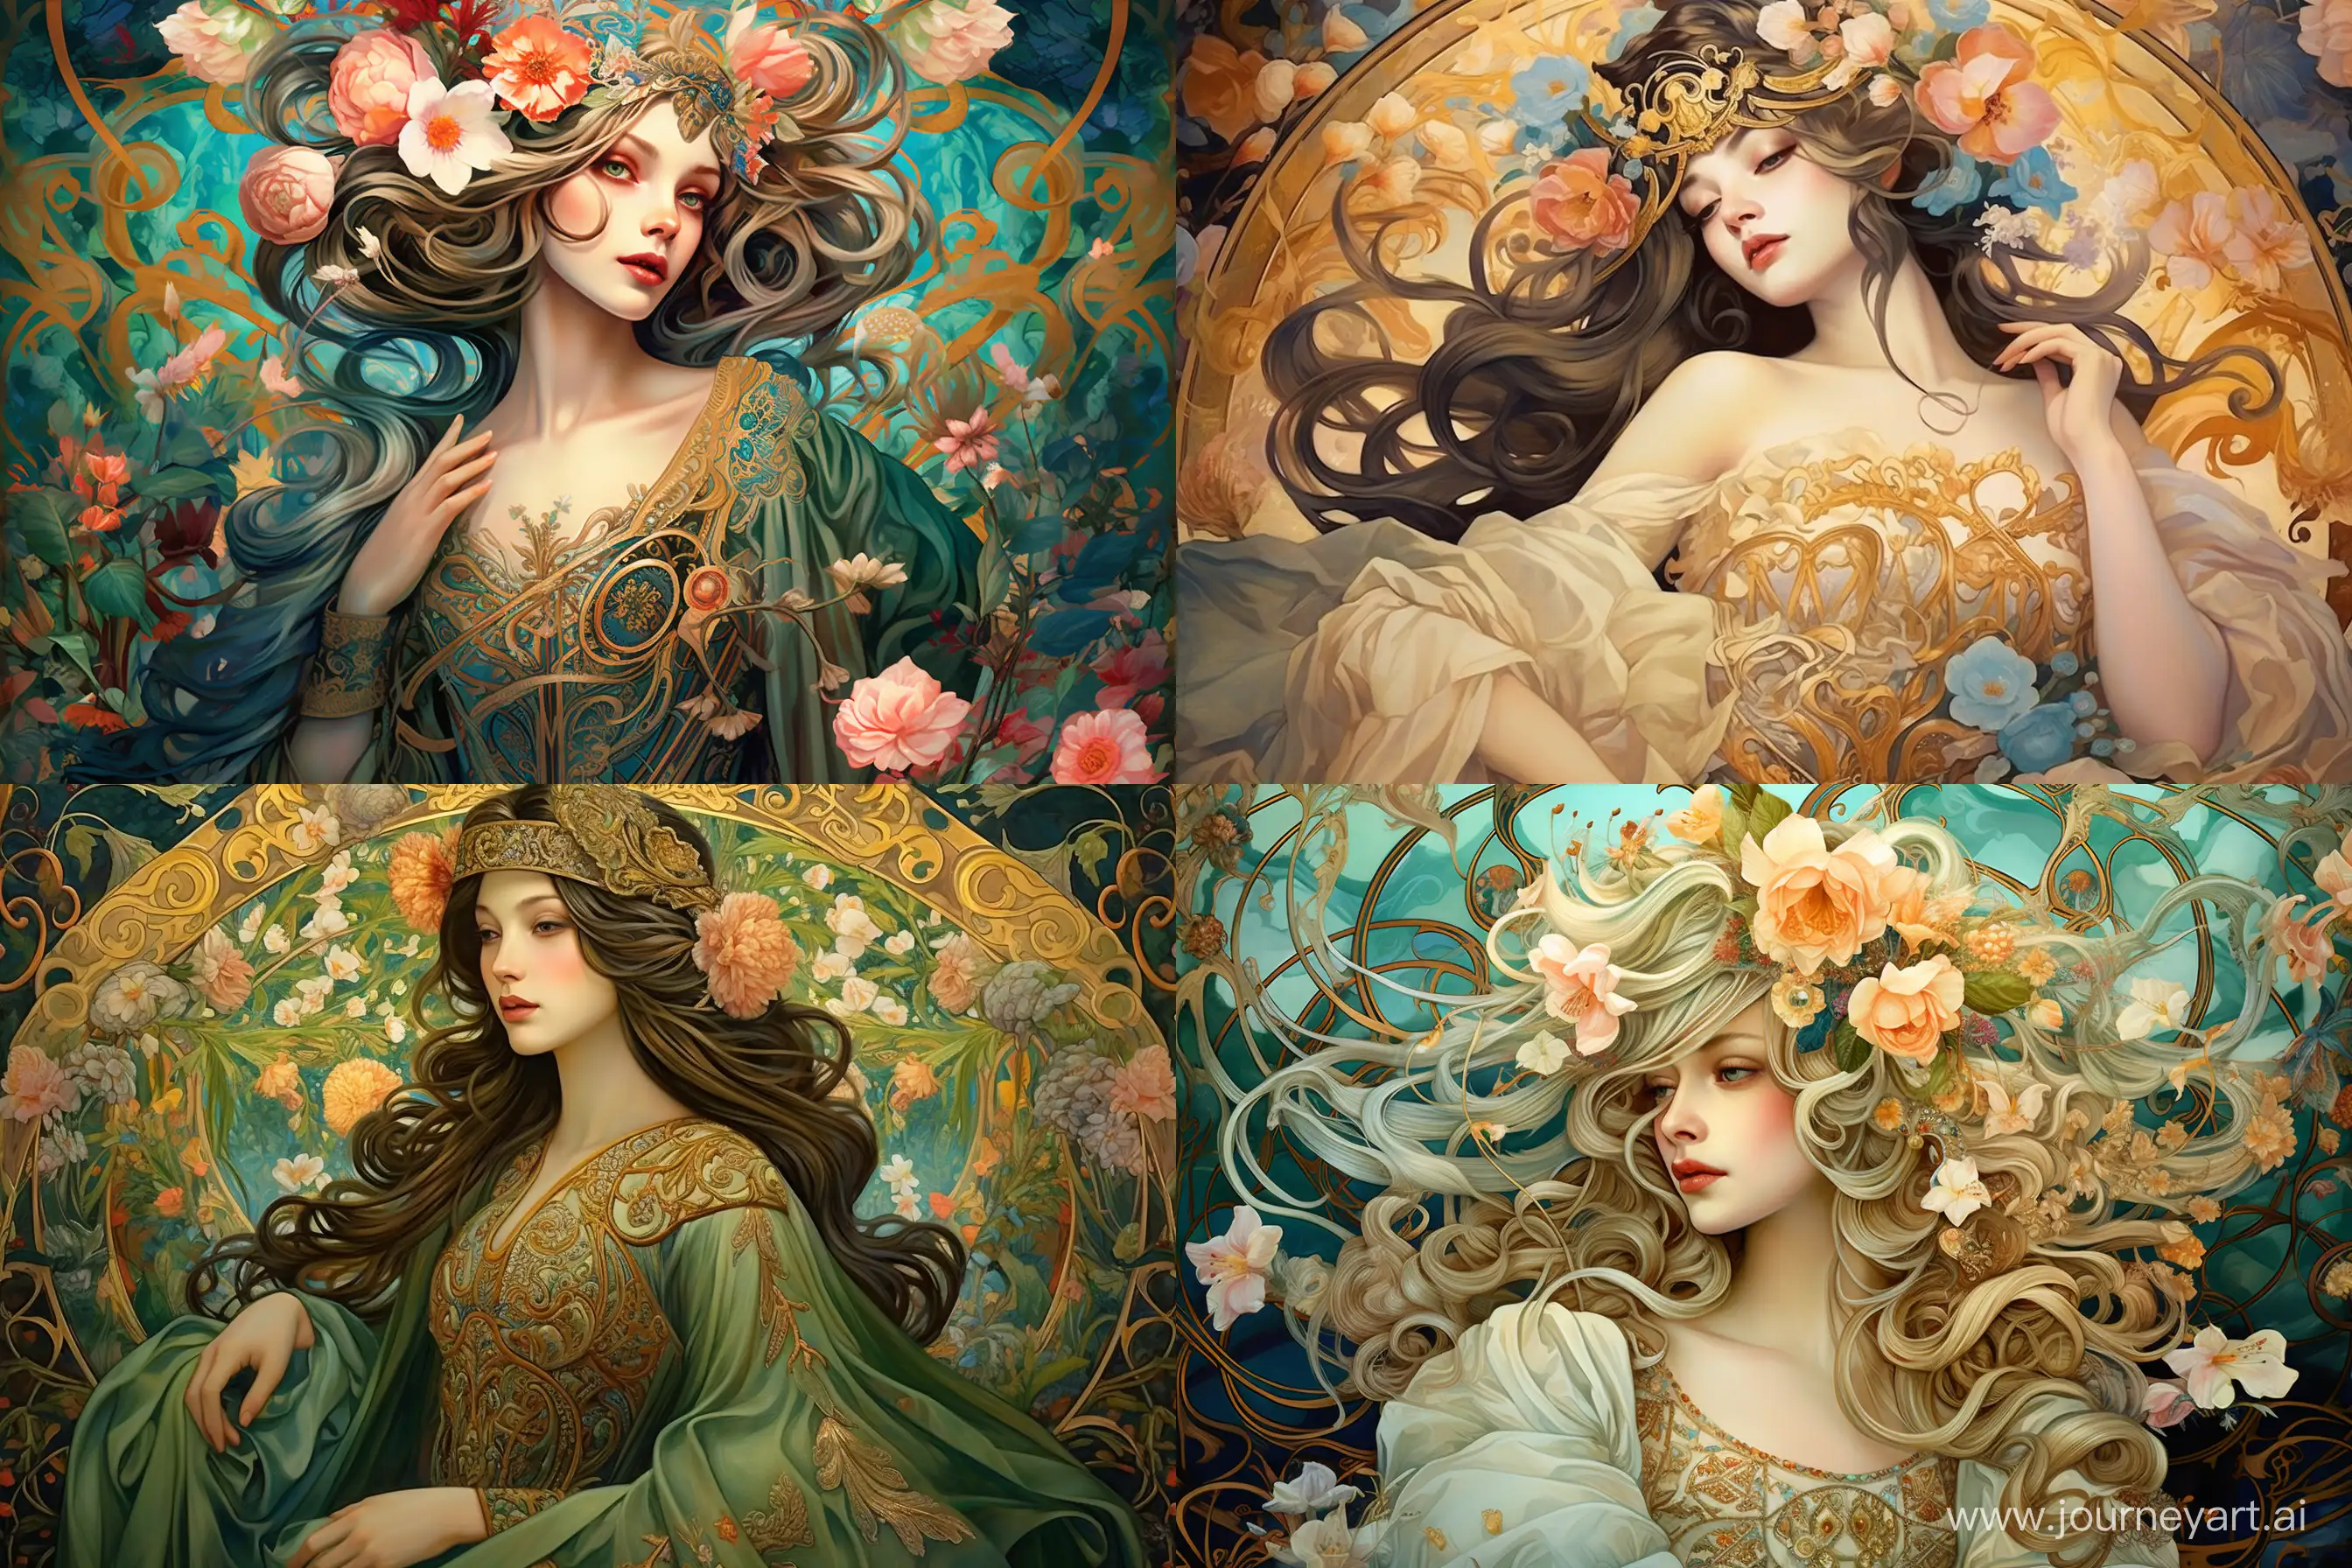 Art Nouveau Enchantress
An elegant enchantress with flowing, ornate robes surrounded by intricate floral patterns. --ar 3:2